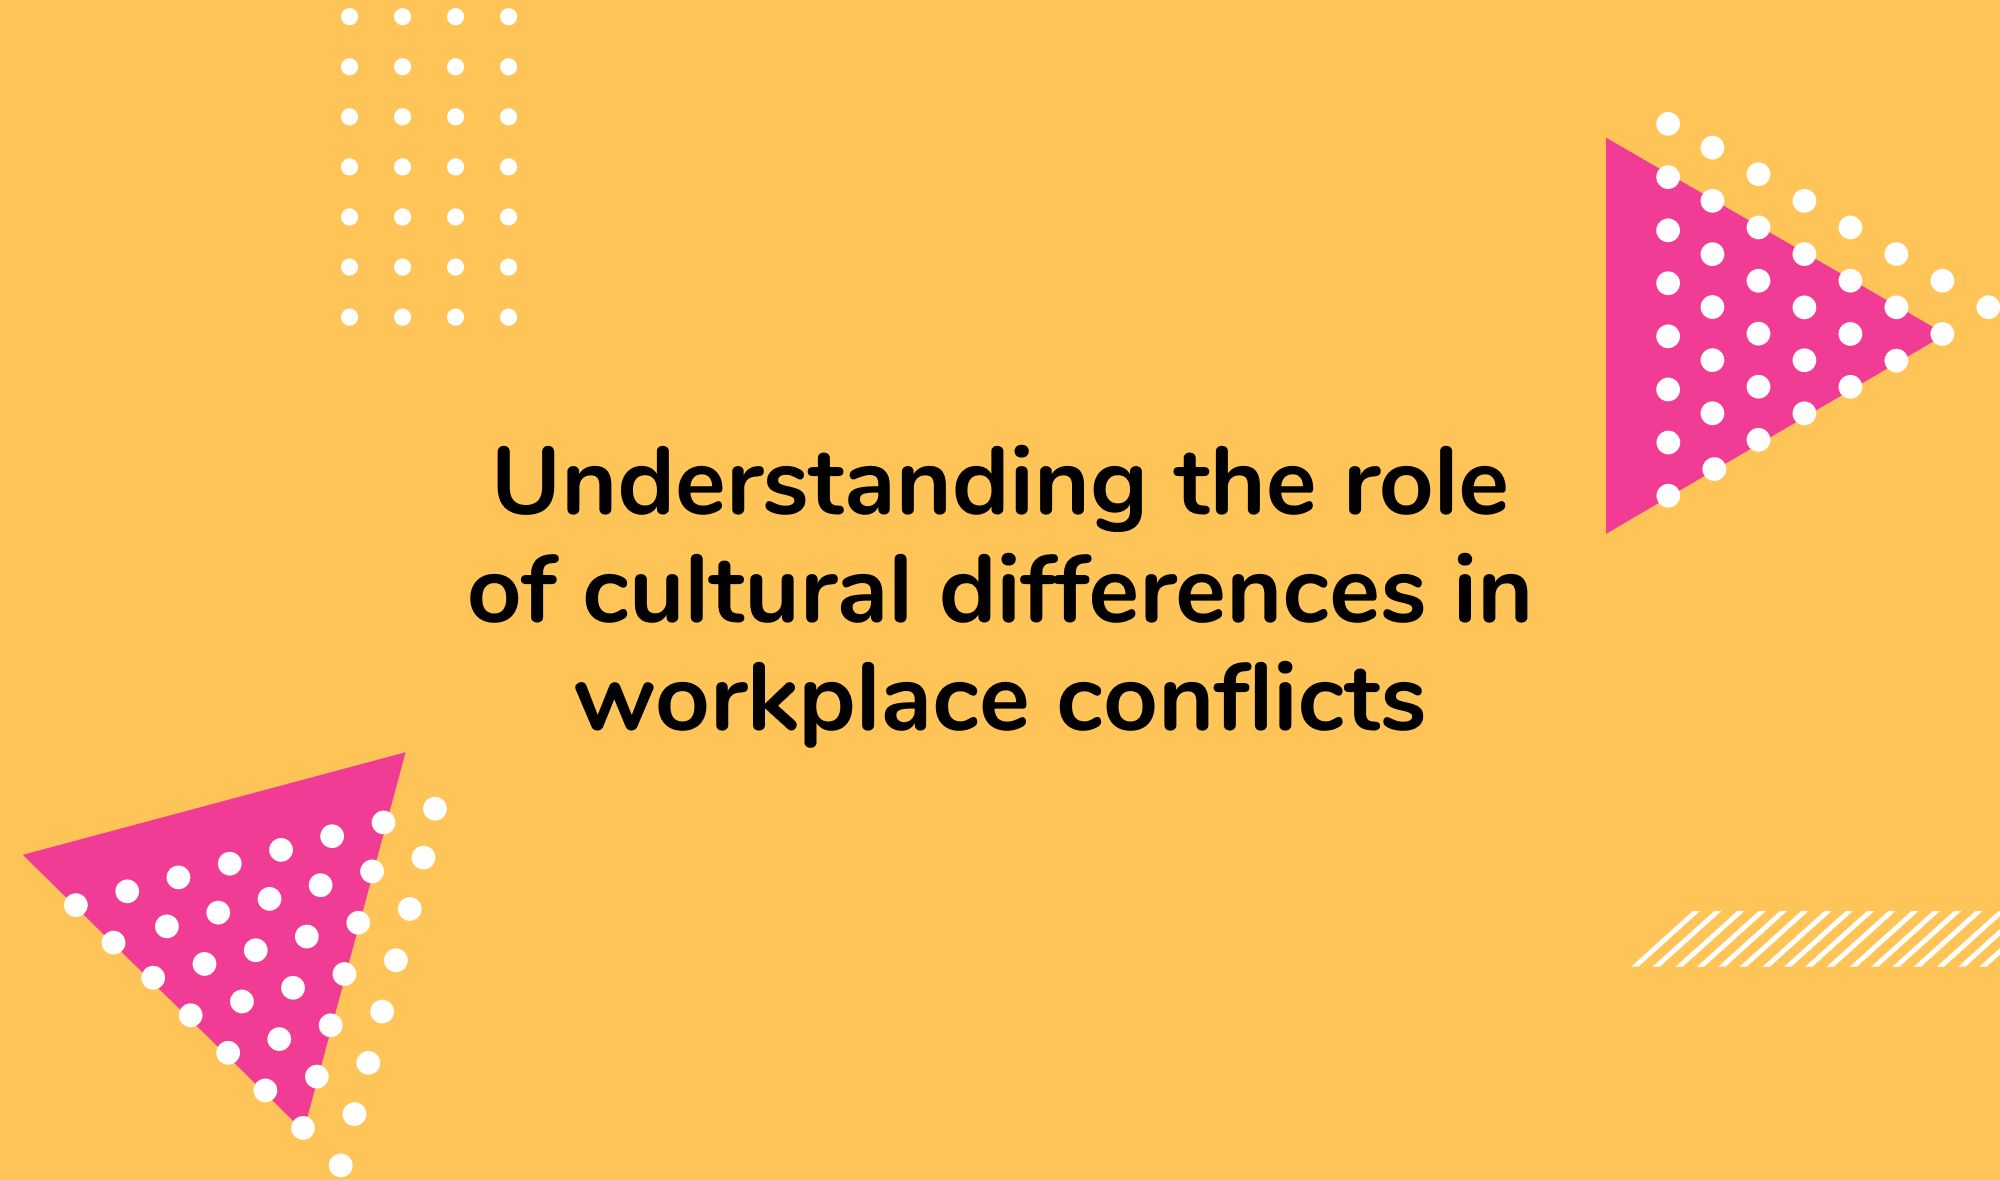 Understanding the role of cultural differences in workplace conflicts